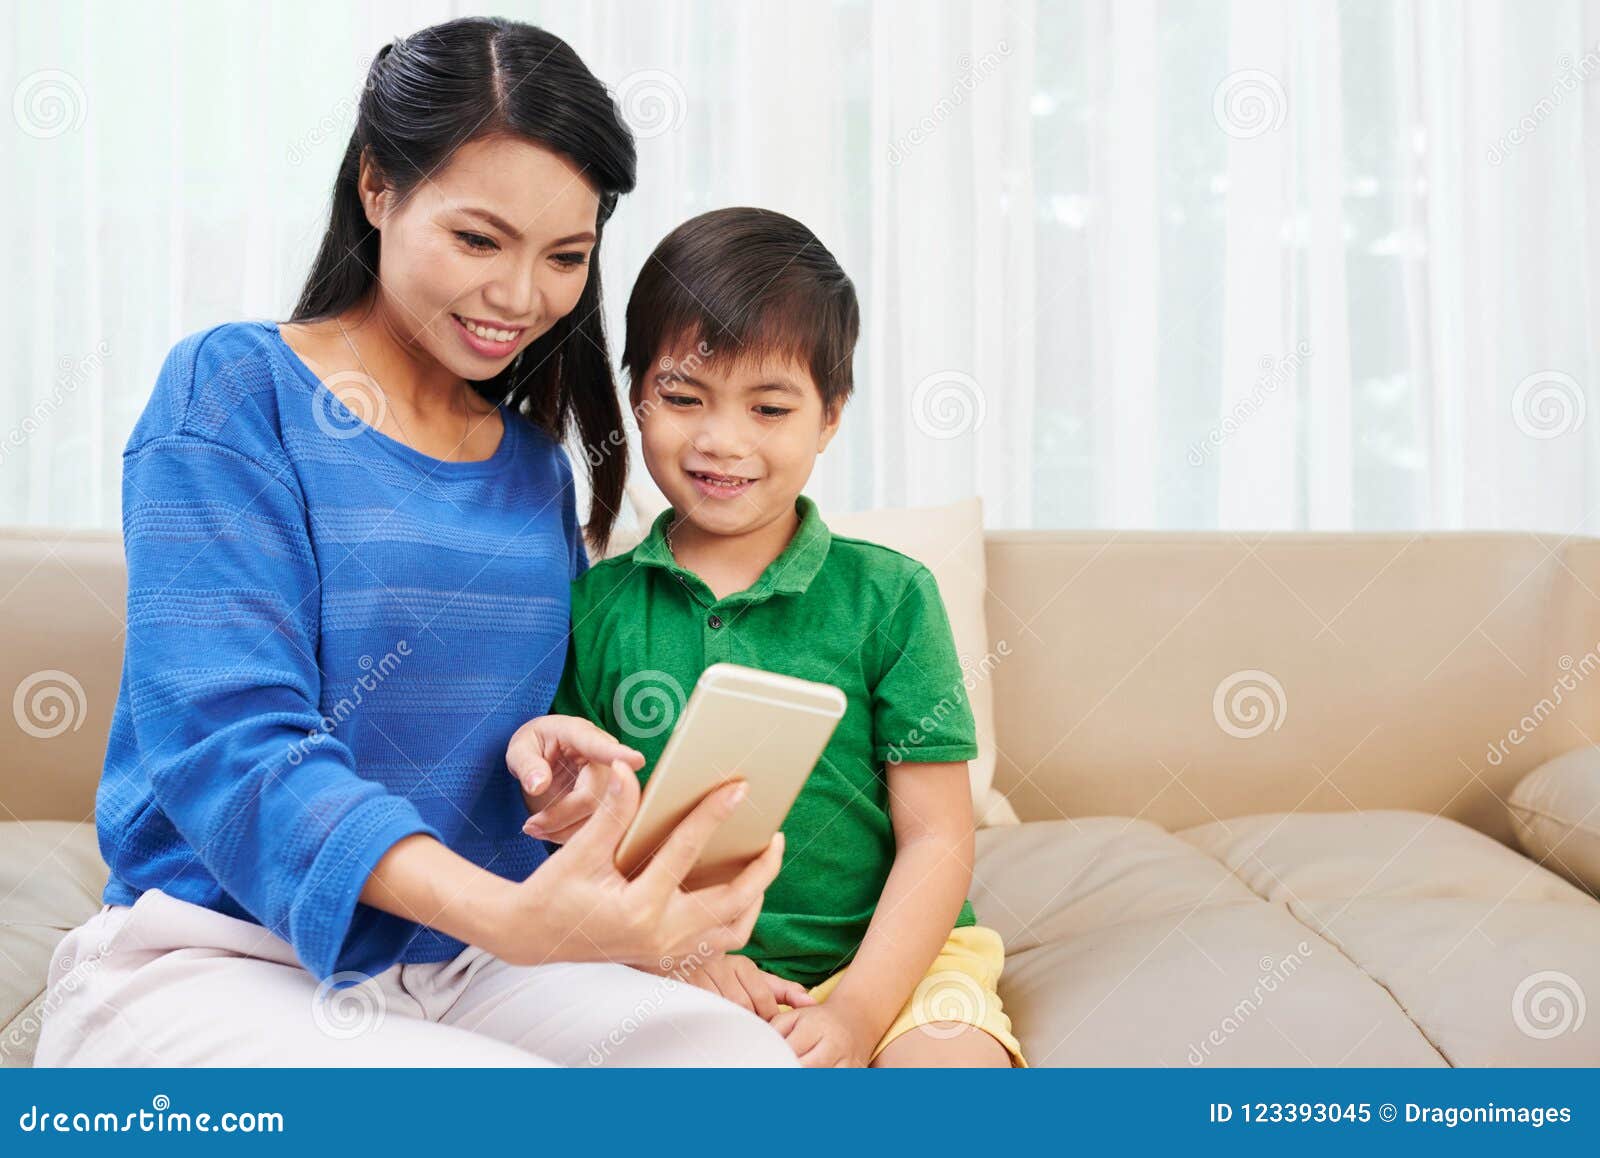 Mother And Son Using Smartphone Stock Image Image Of Lifestyle